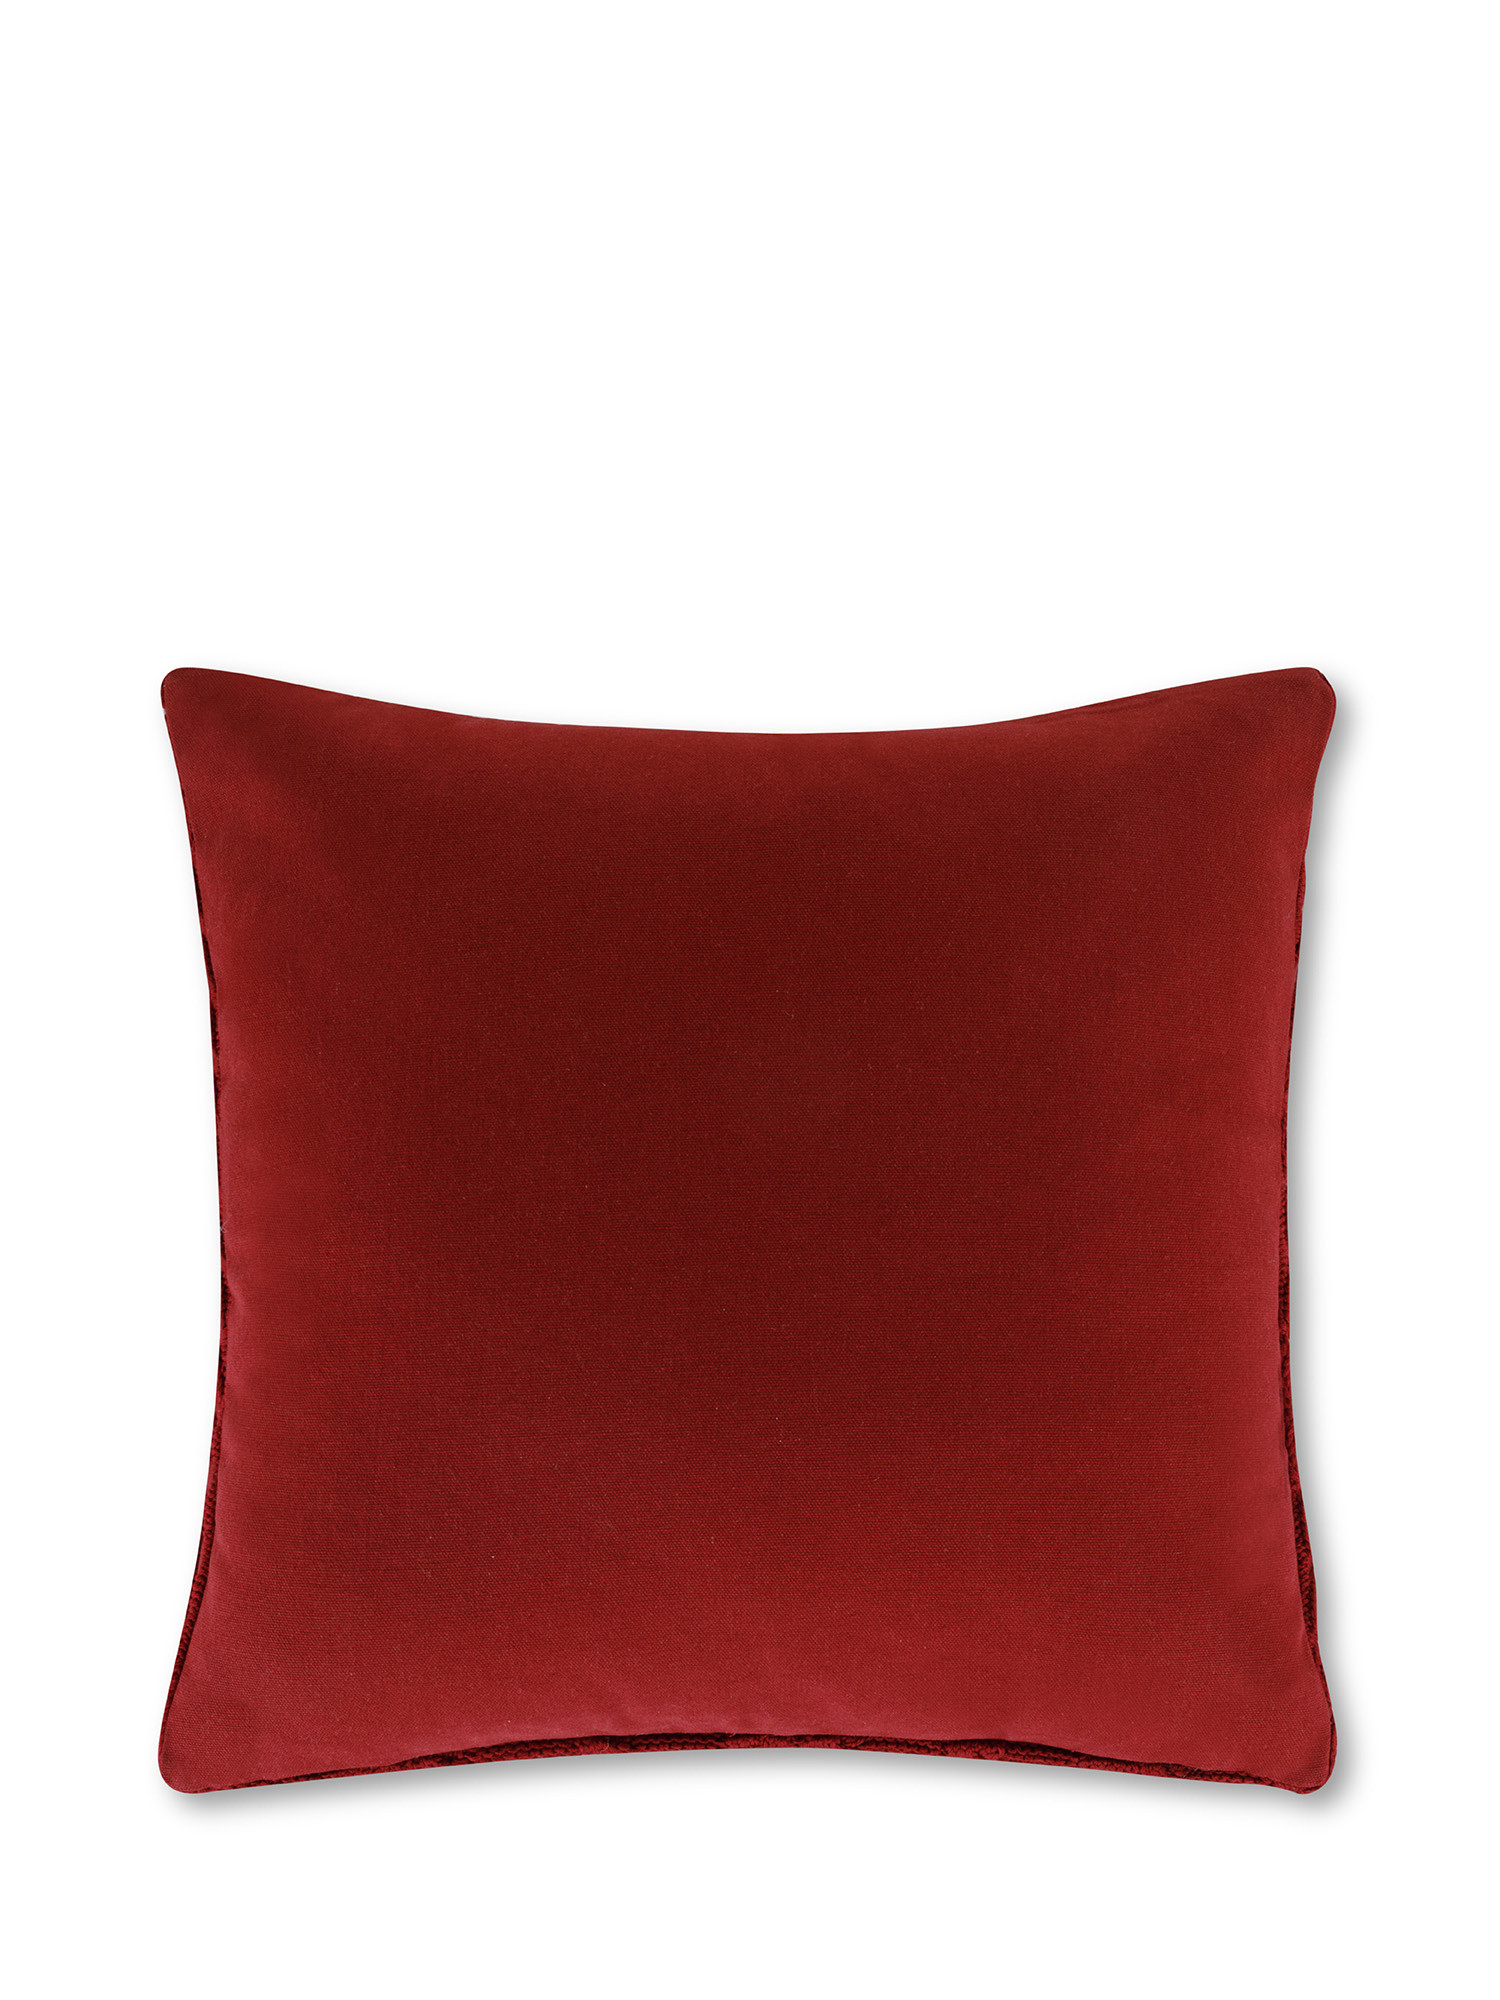 Knitted cushion with braid motif 45x45 cm, Red, large image number 1